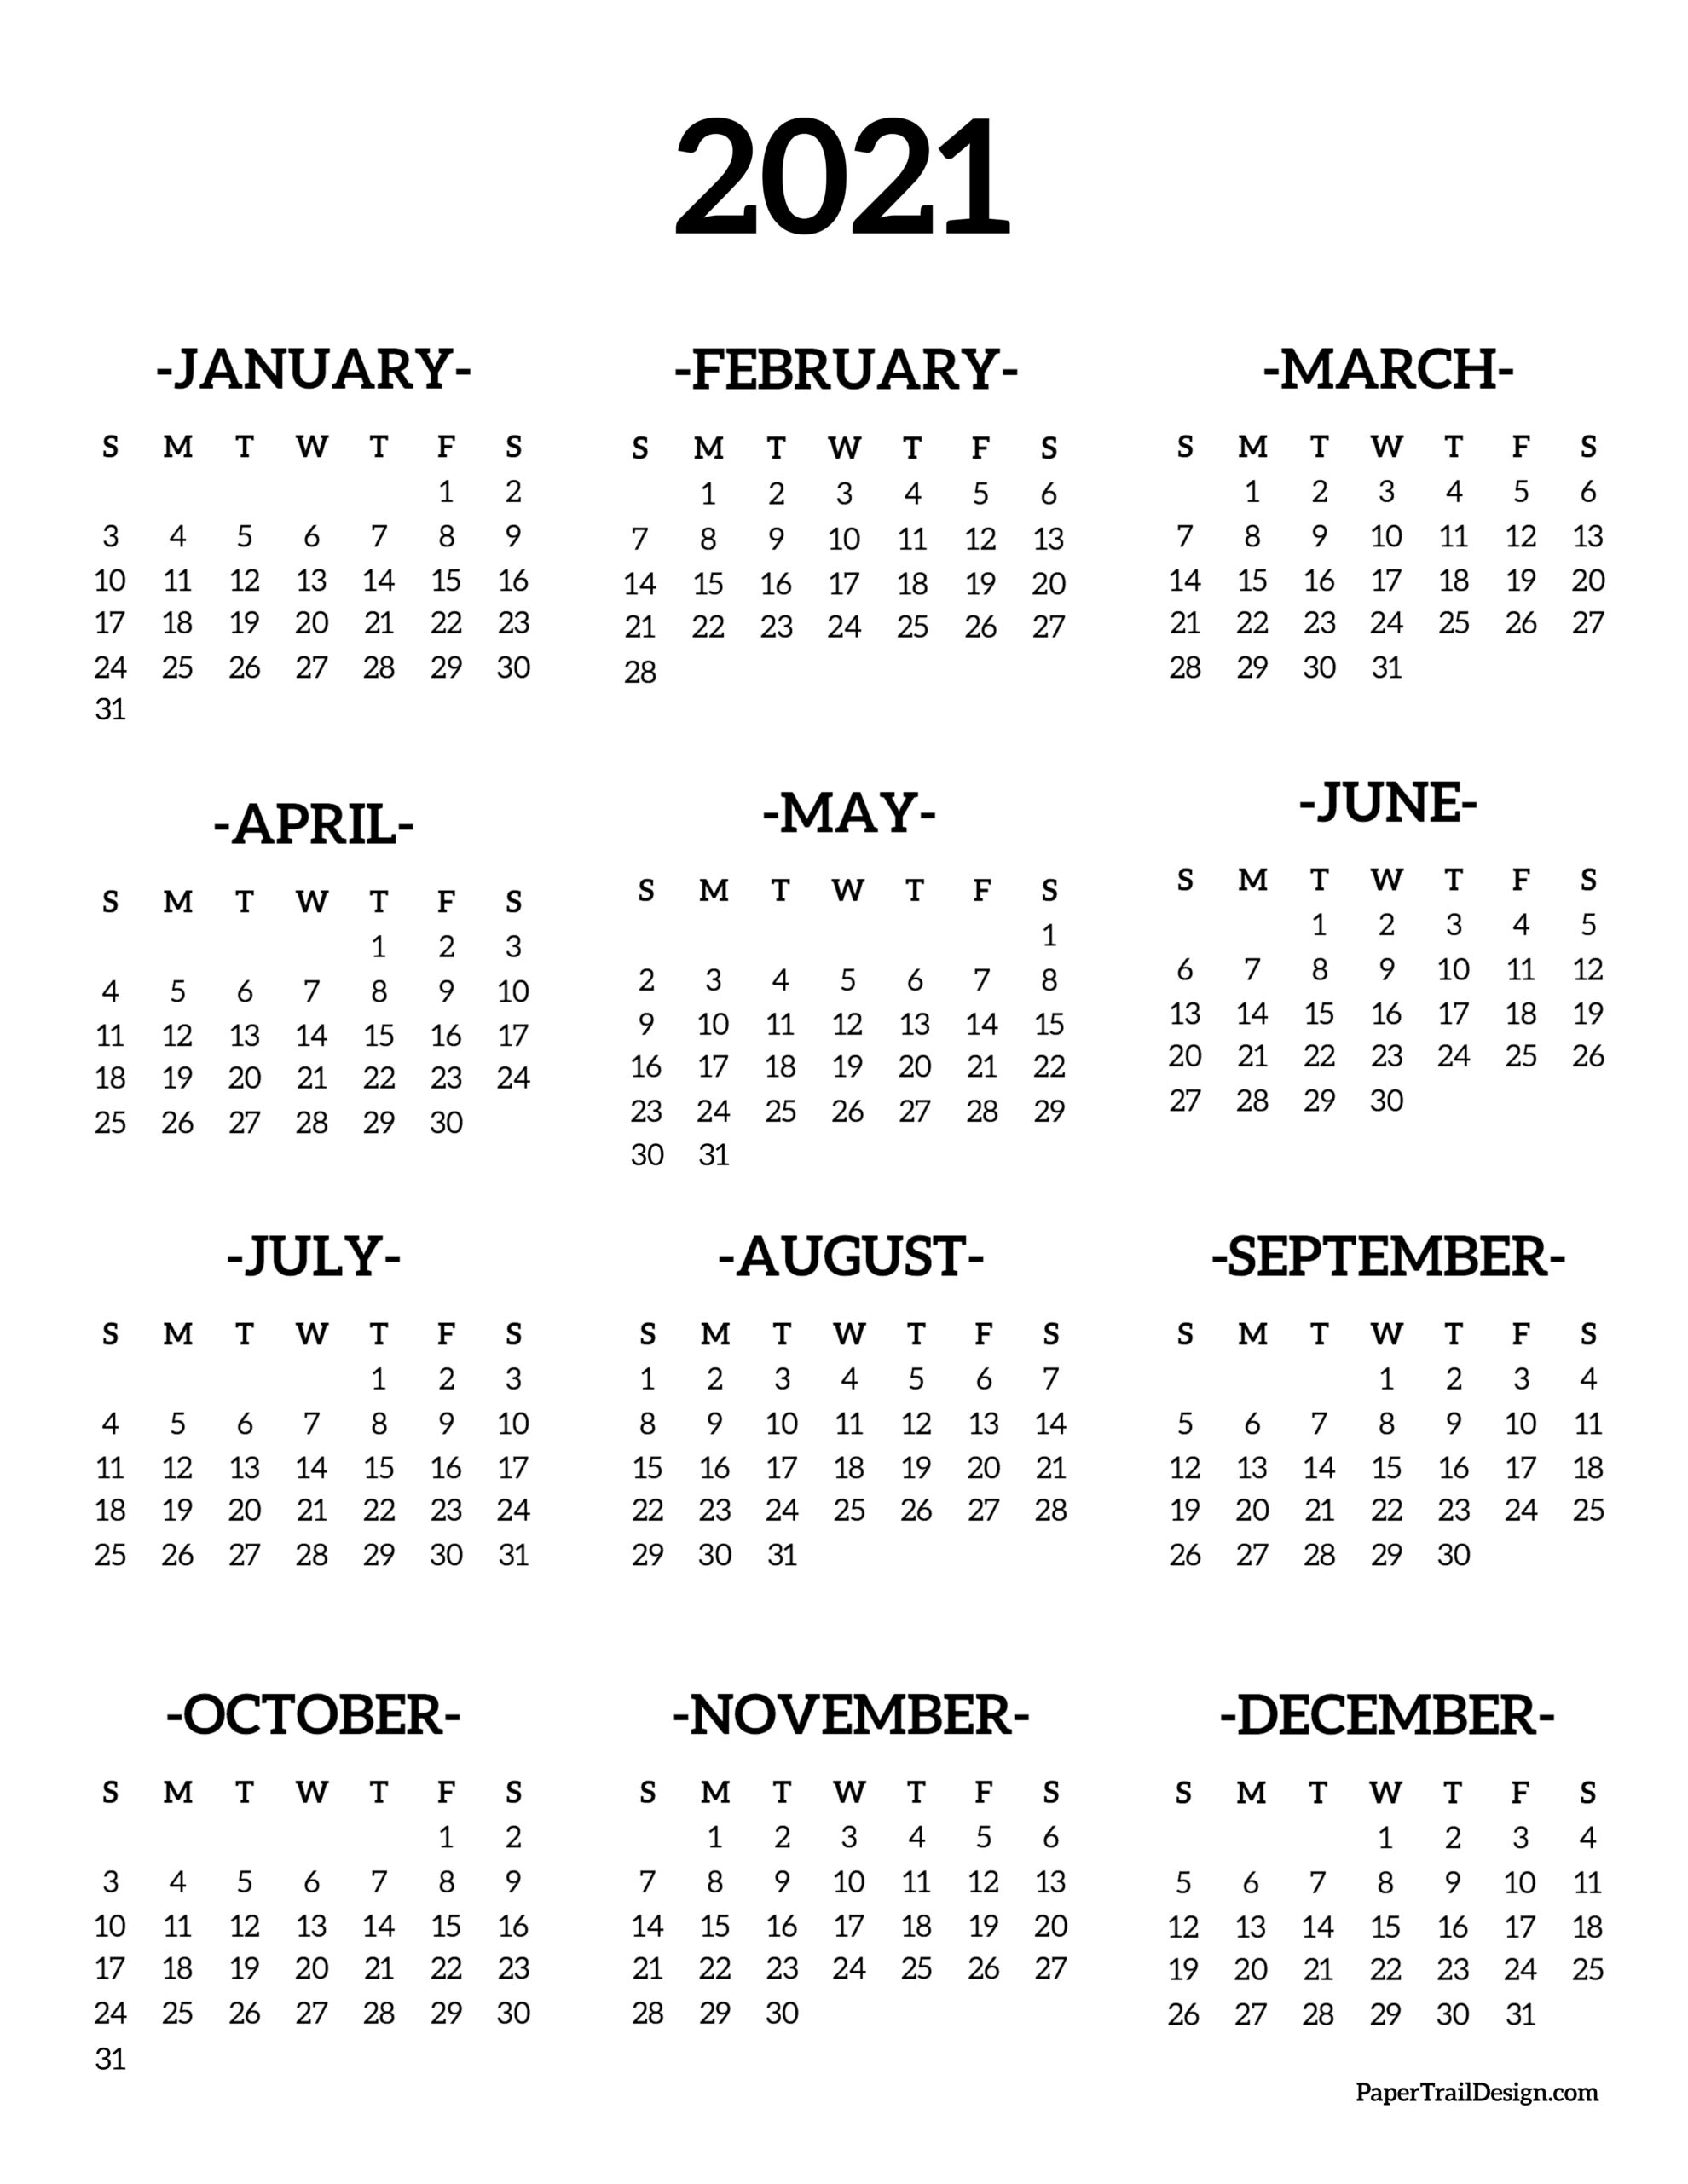 Calendar 2021 Printable One Page - Paper Trail Design